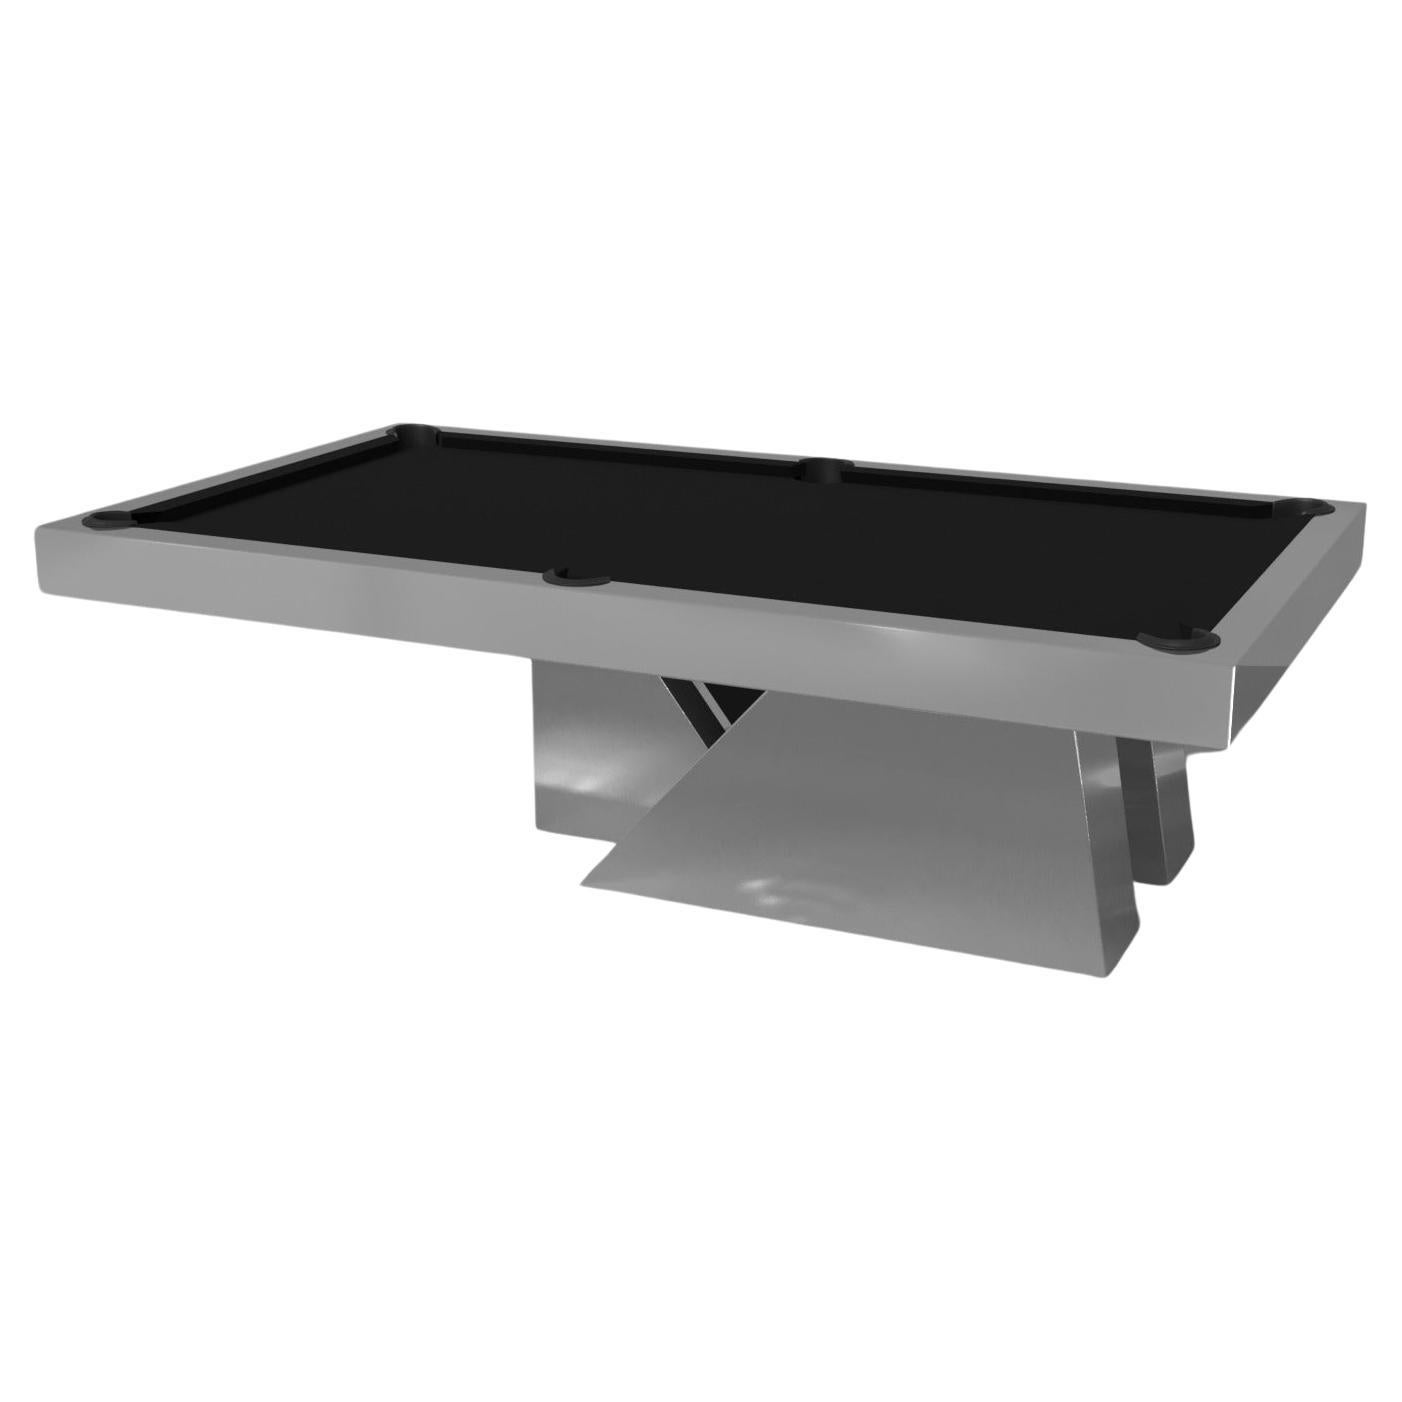 Elevate Customs Stilt Pool Table / Stainless Steel Metal in 9' - Made in USA For Sale